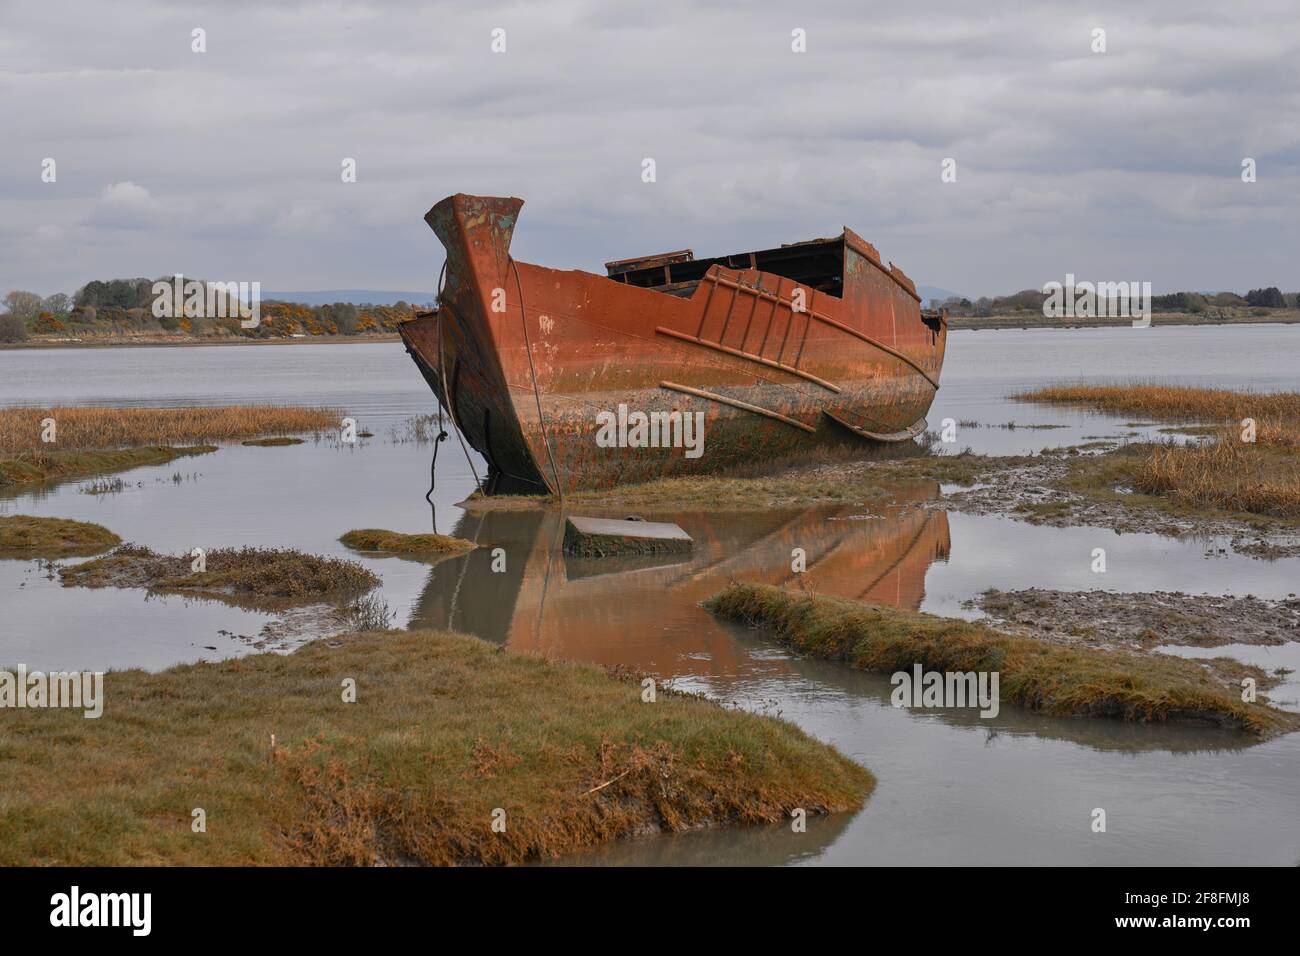 The remanence of what once was a brand new and ship shape ship now rest in silence. Another picture from my ‘sands of time’ collection Stock Photo